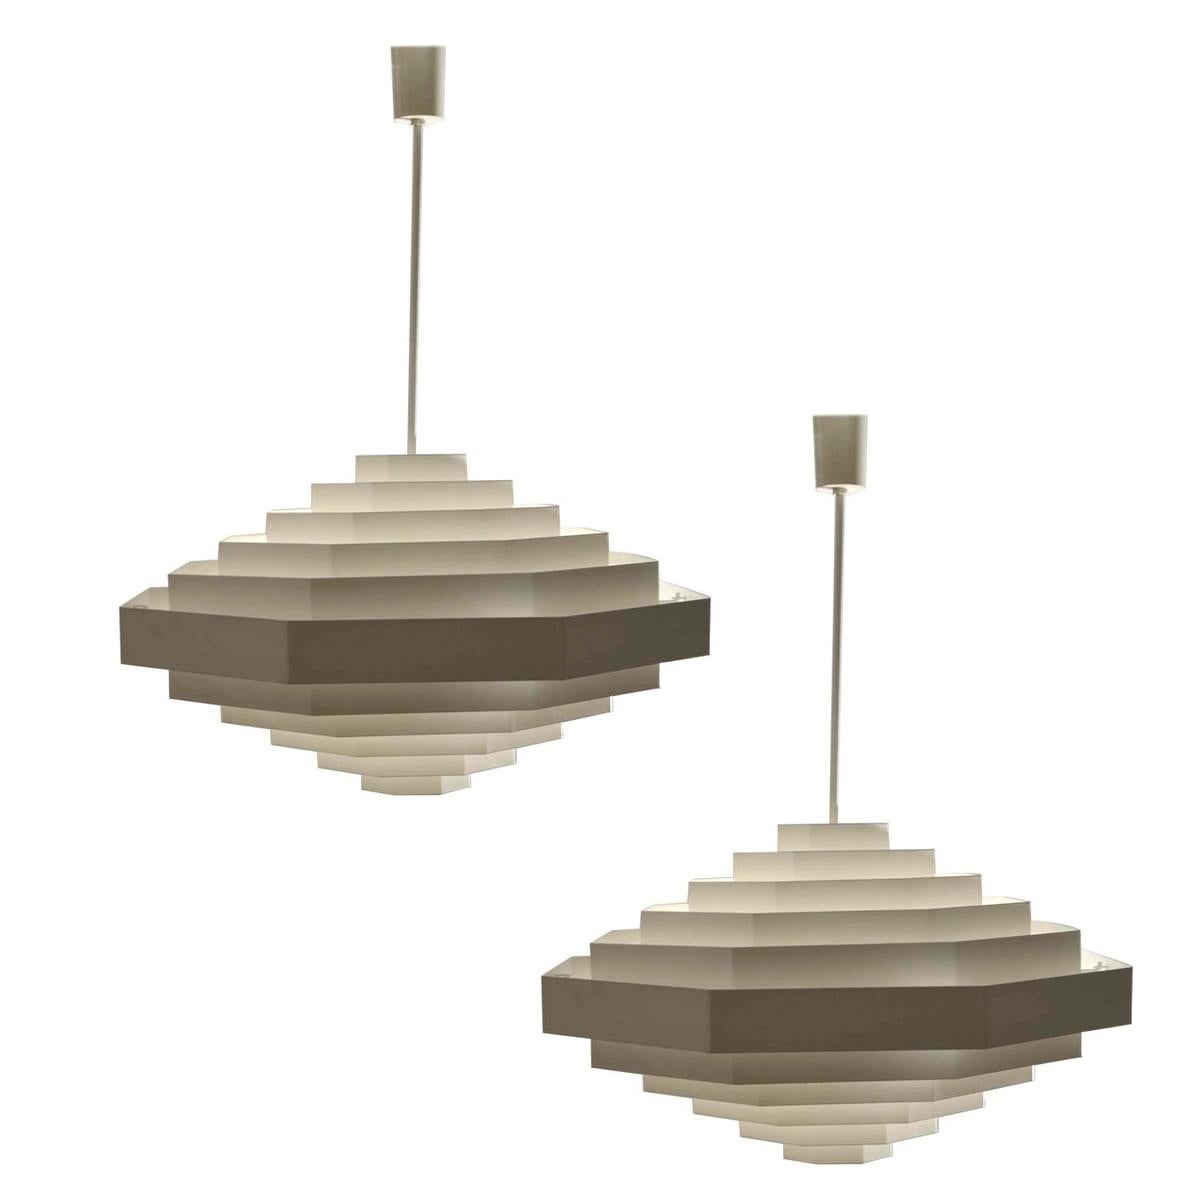 Two large white octagonal chandeliers (diameter 70 cm) are made in metal strips of enameled metal cascading in both vertical directions, 1970s Spectral Germany. They look like gigantic floating diamonds. The light is diffused by the layers of